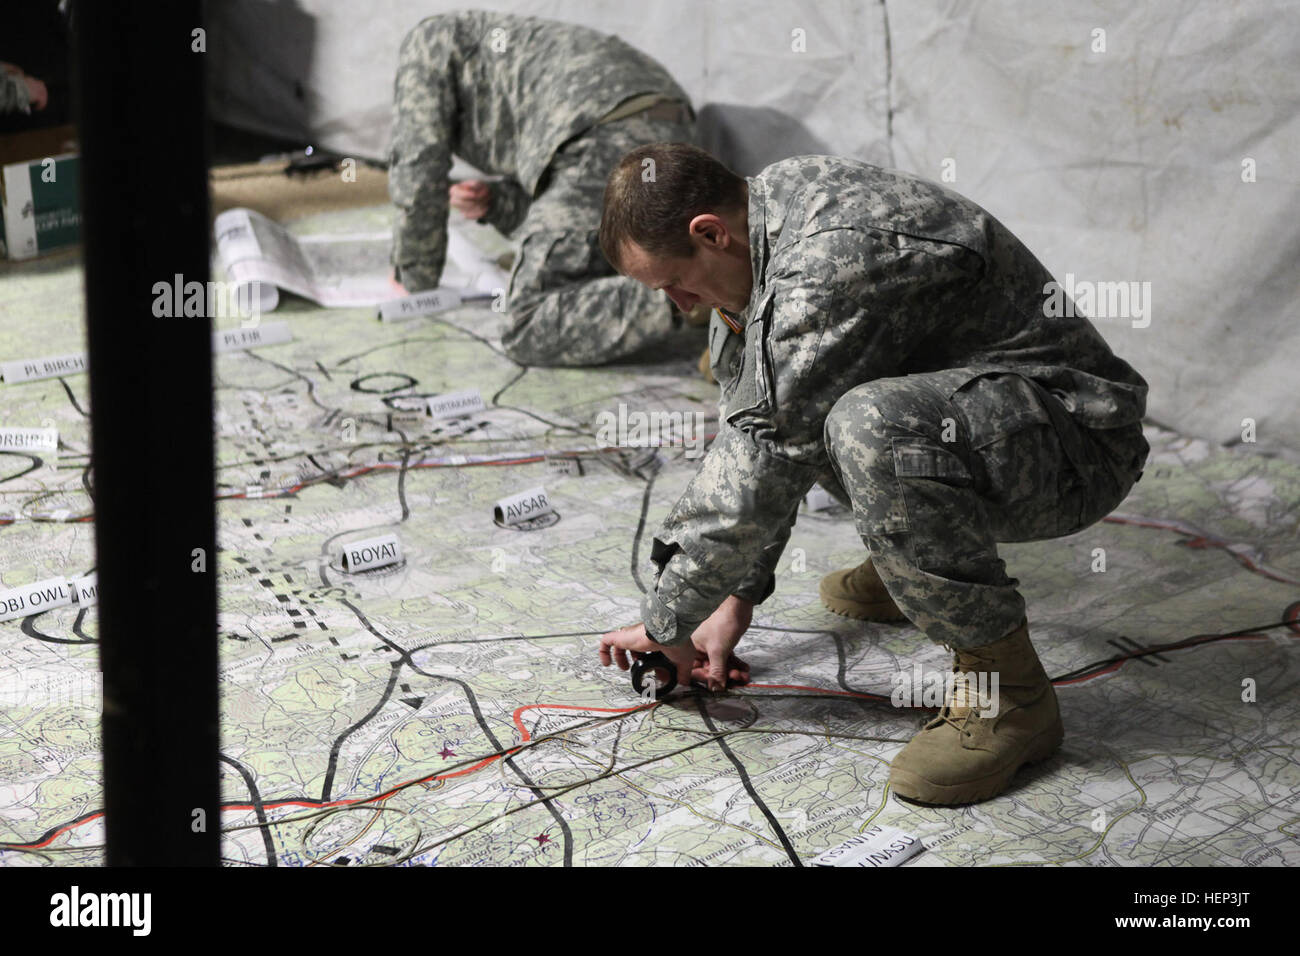 A U.S. Soldier of 2nd Cavalry Regiment marks a map while conducting an intelligence collection rehearsal during exercise Allied Spirit at the Joint Multinational Readiness Center in Hohenfels, Germany, Jan. 25, 2015. Exercise Allied Spirit includes more than 2,000 participants from Canada, Hungary, Netherlands, United Kingdom, and the U.S. Allied Spirit is exercising tactical interoperability and testing secure communications within alliance members. (U.S. Army photo by Pfc. Lloyd Villanueva/Released) Allied Spirit I 150125-A-WG858-001 Stock Photo